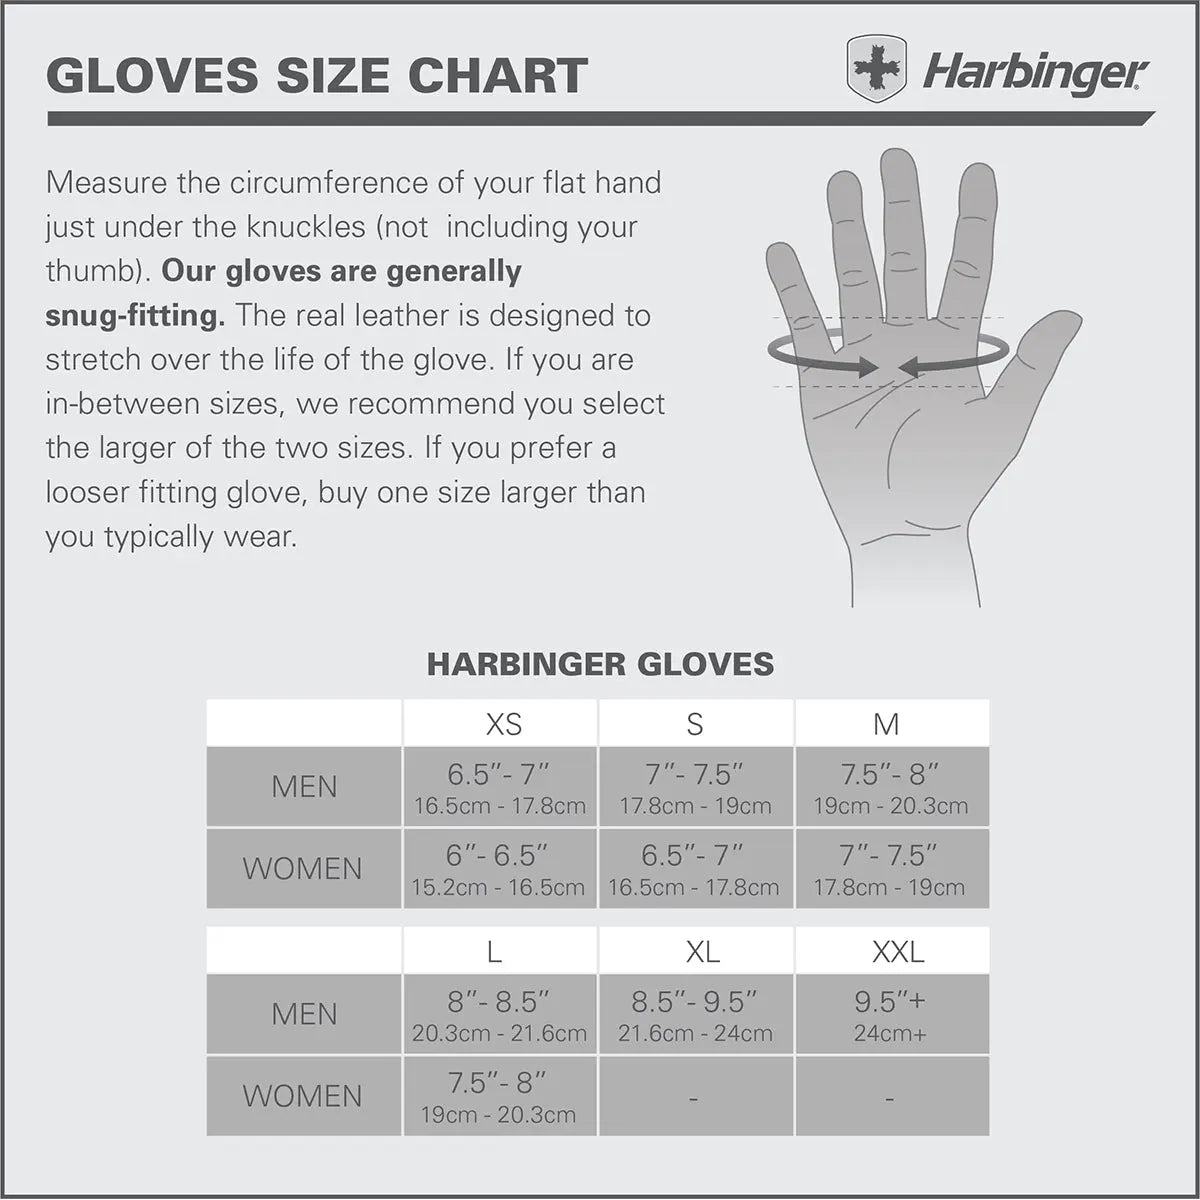 Harbinger Training Grip Weightlifting Workout Gloves 2.0, Small